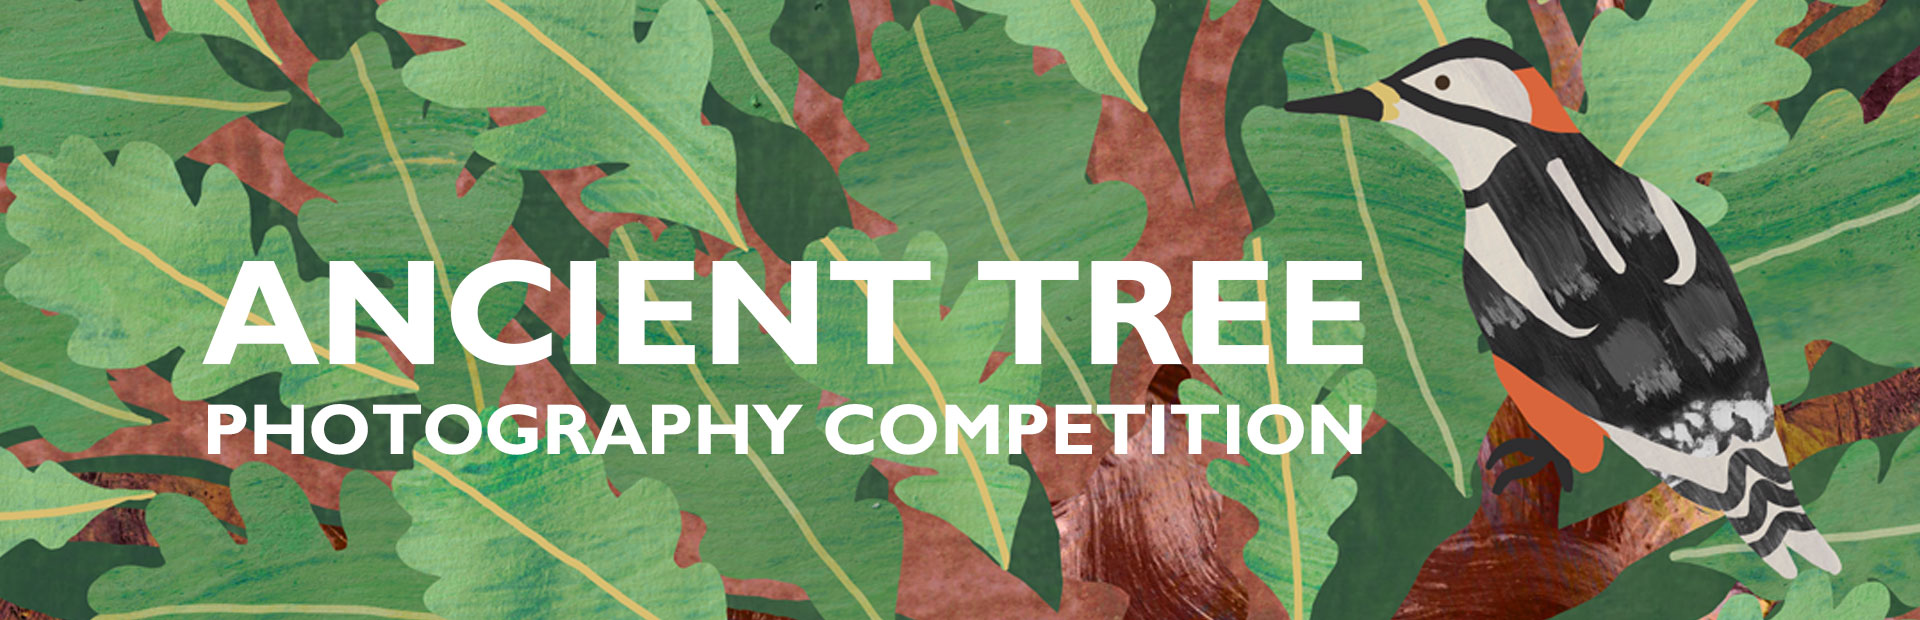 Ancient Tree Photo Competition